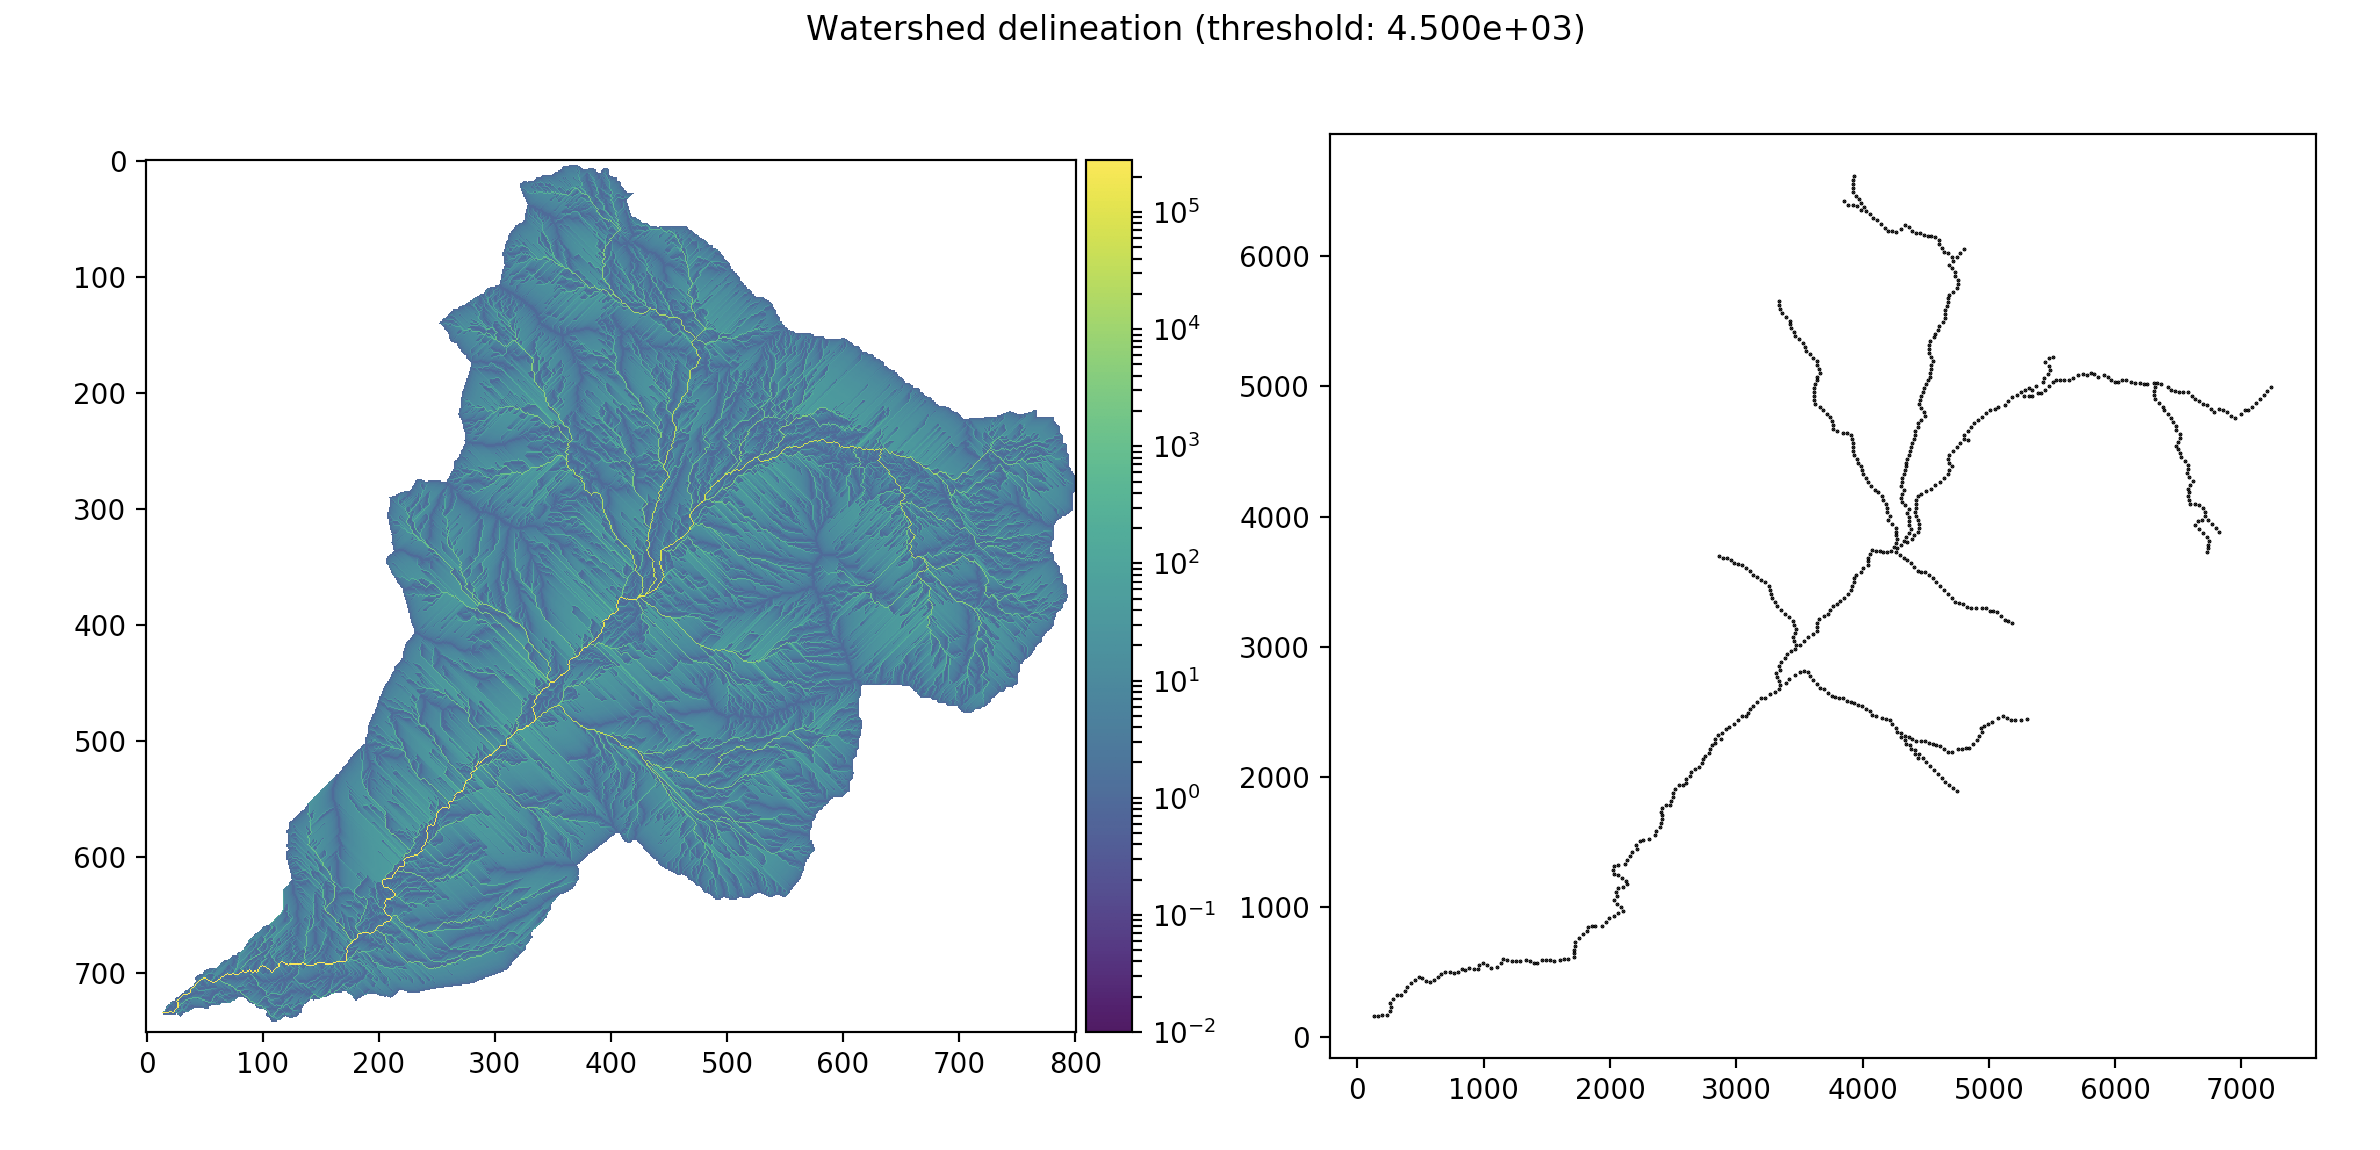 Watershed delineation